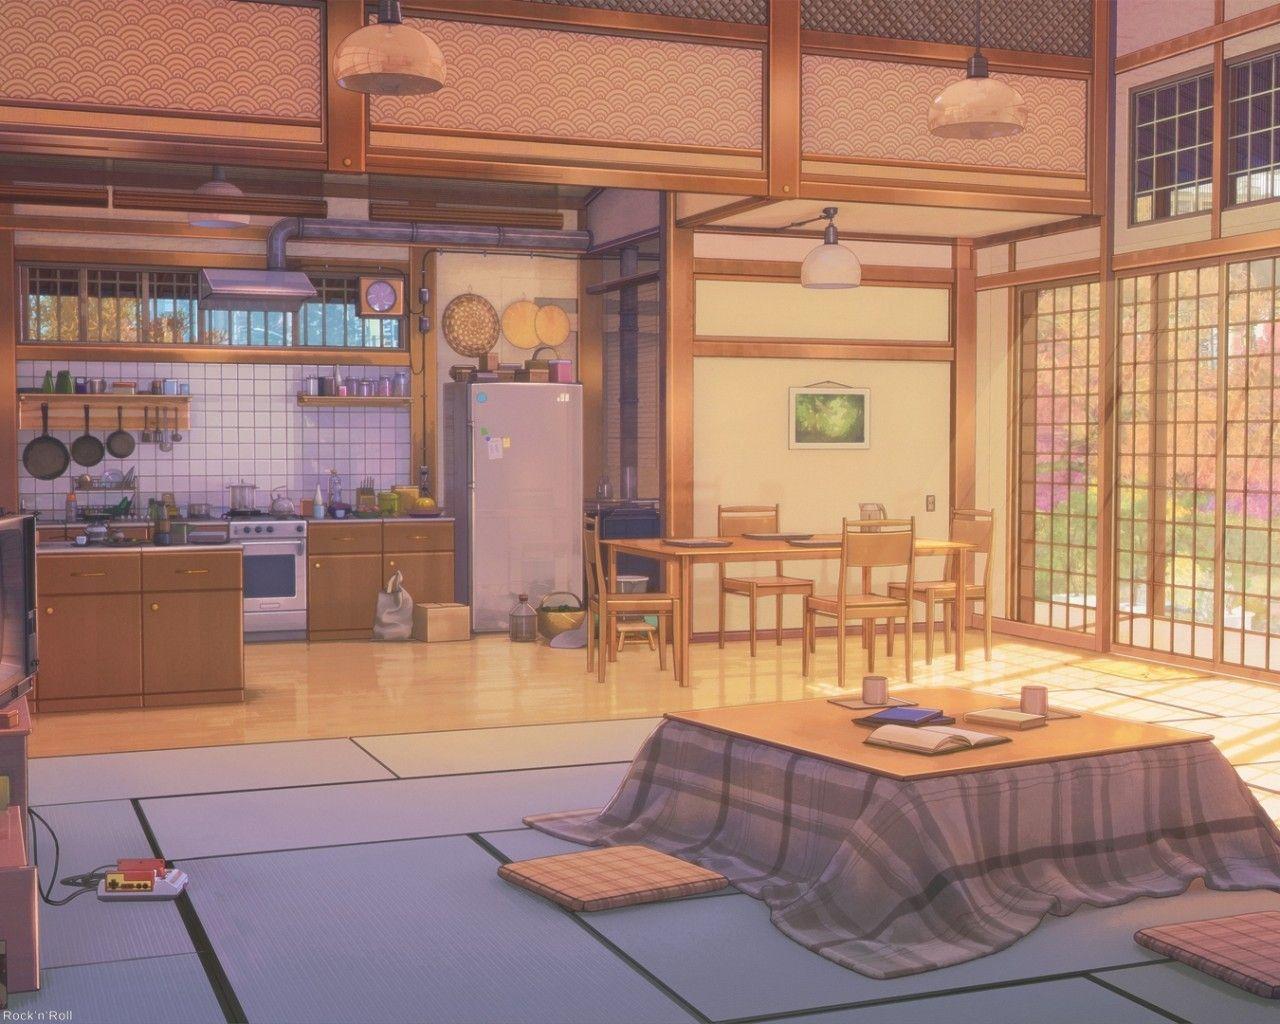 Download 1280x1024 Anime Room, Kitchen, Inside The Building